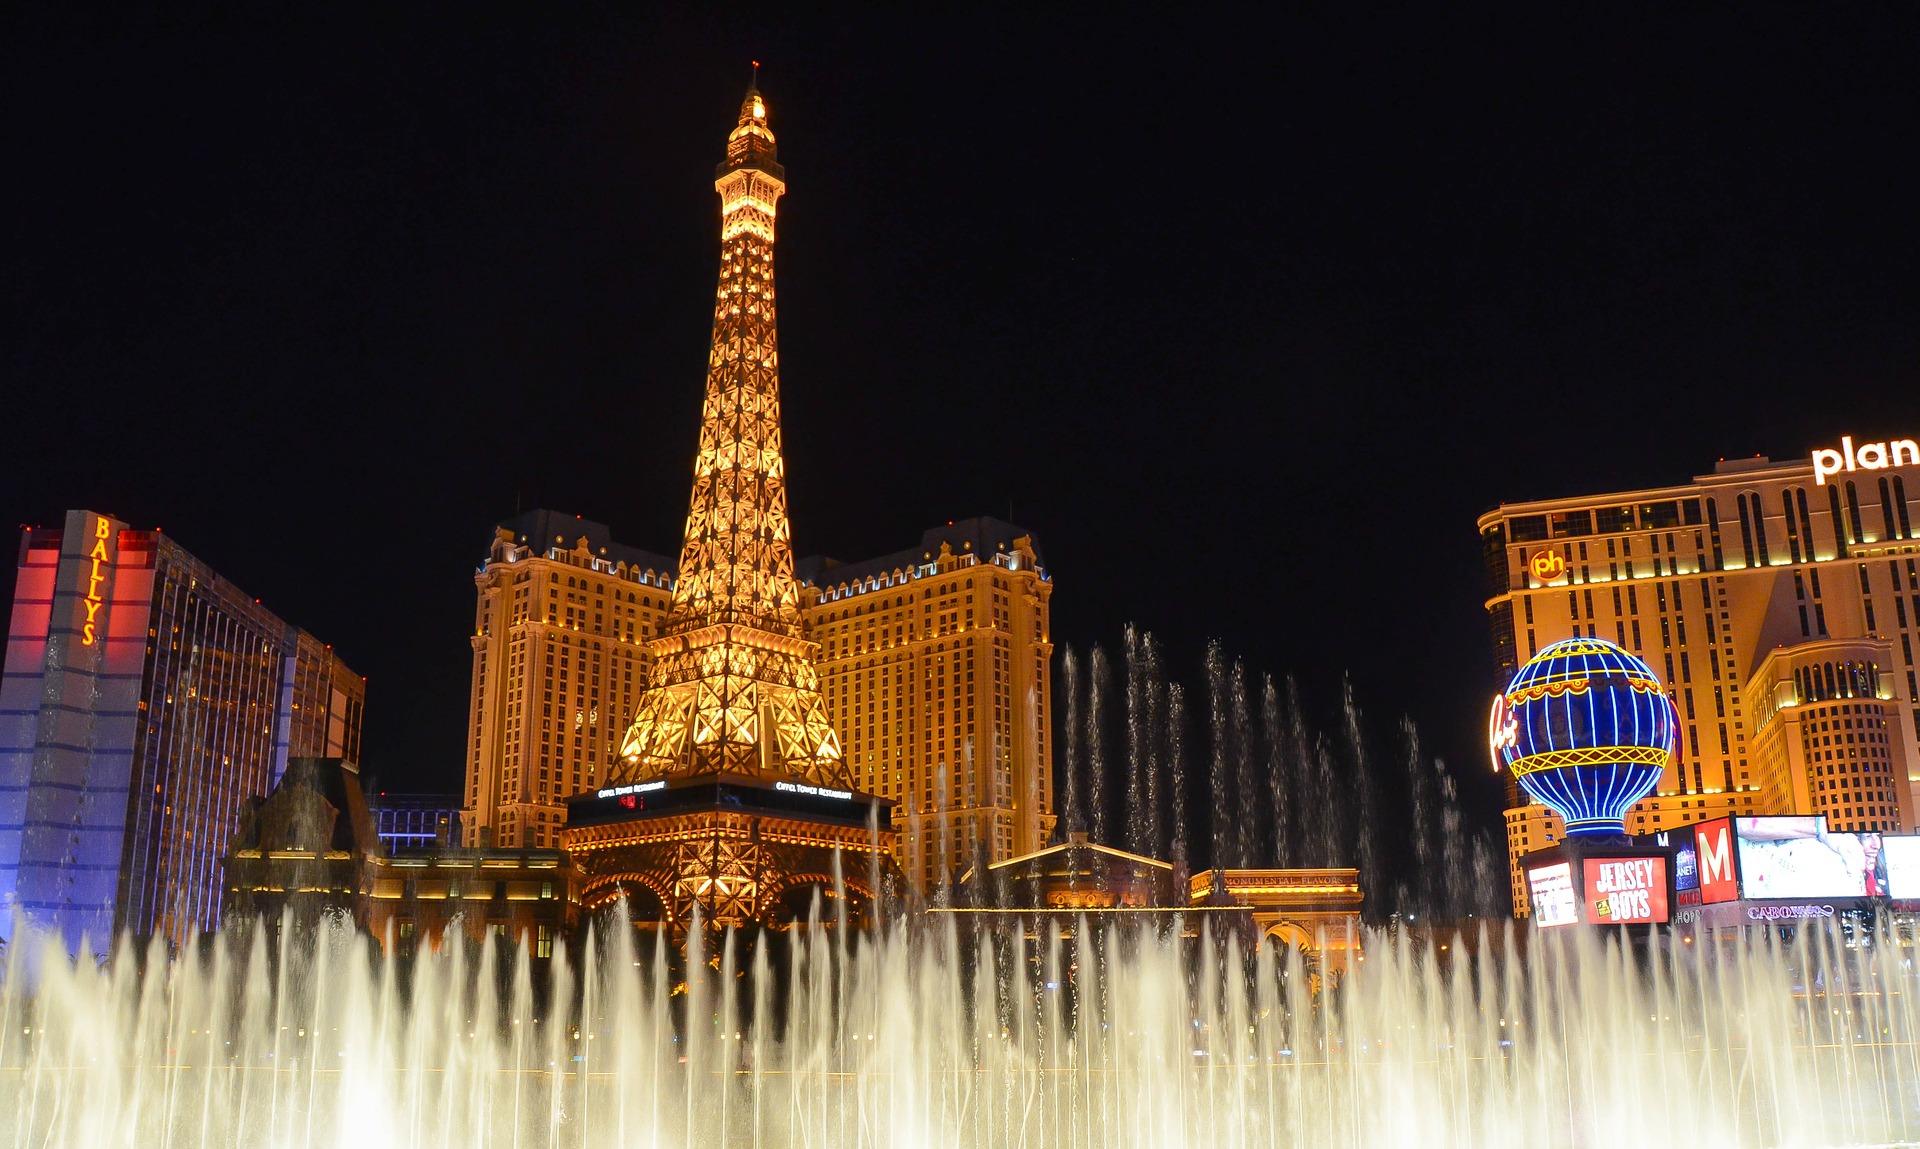 Bellagio’s lakefront dancing fountains in Las Vegas, with the Eiffel Tower Experience in background